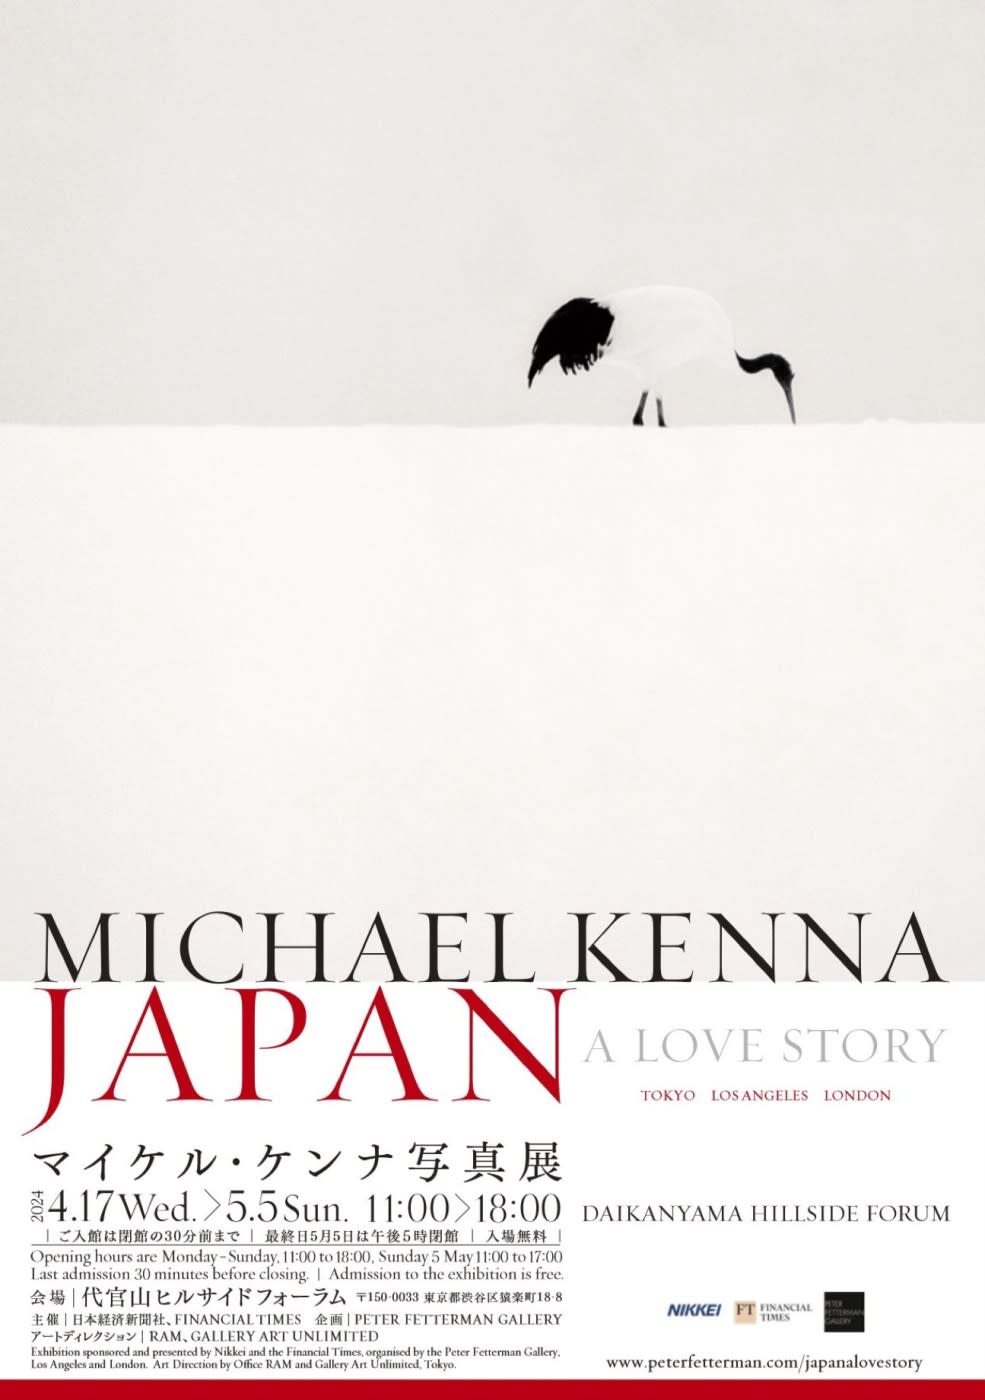 「JAPAN / A Love Story 100 Photographs by Michael Kenna 